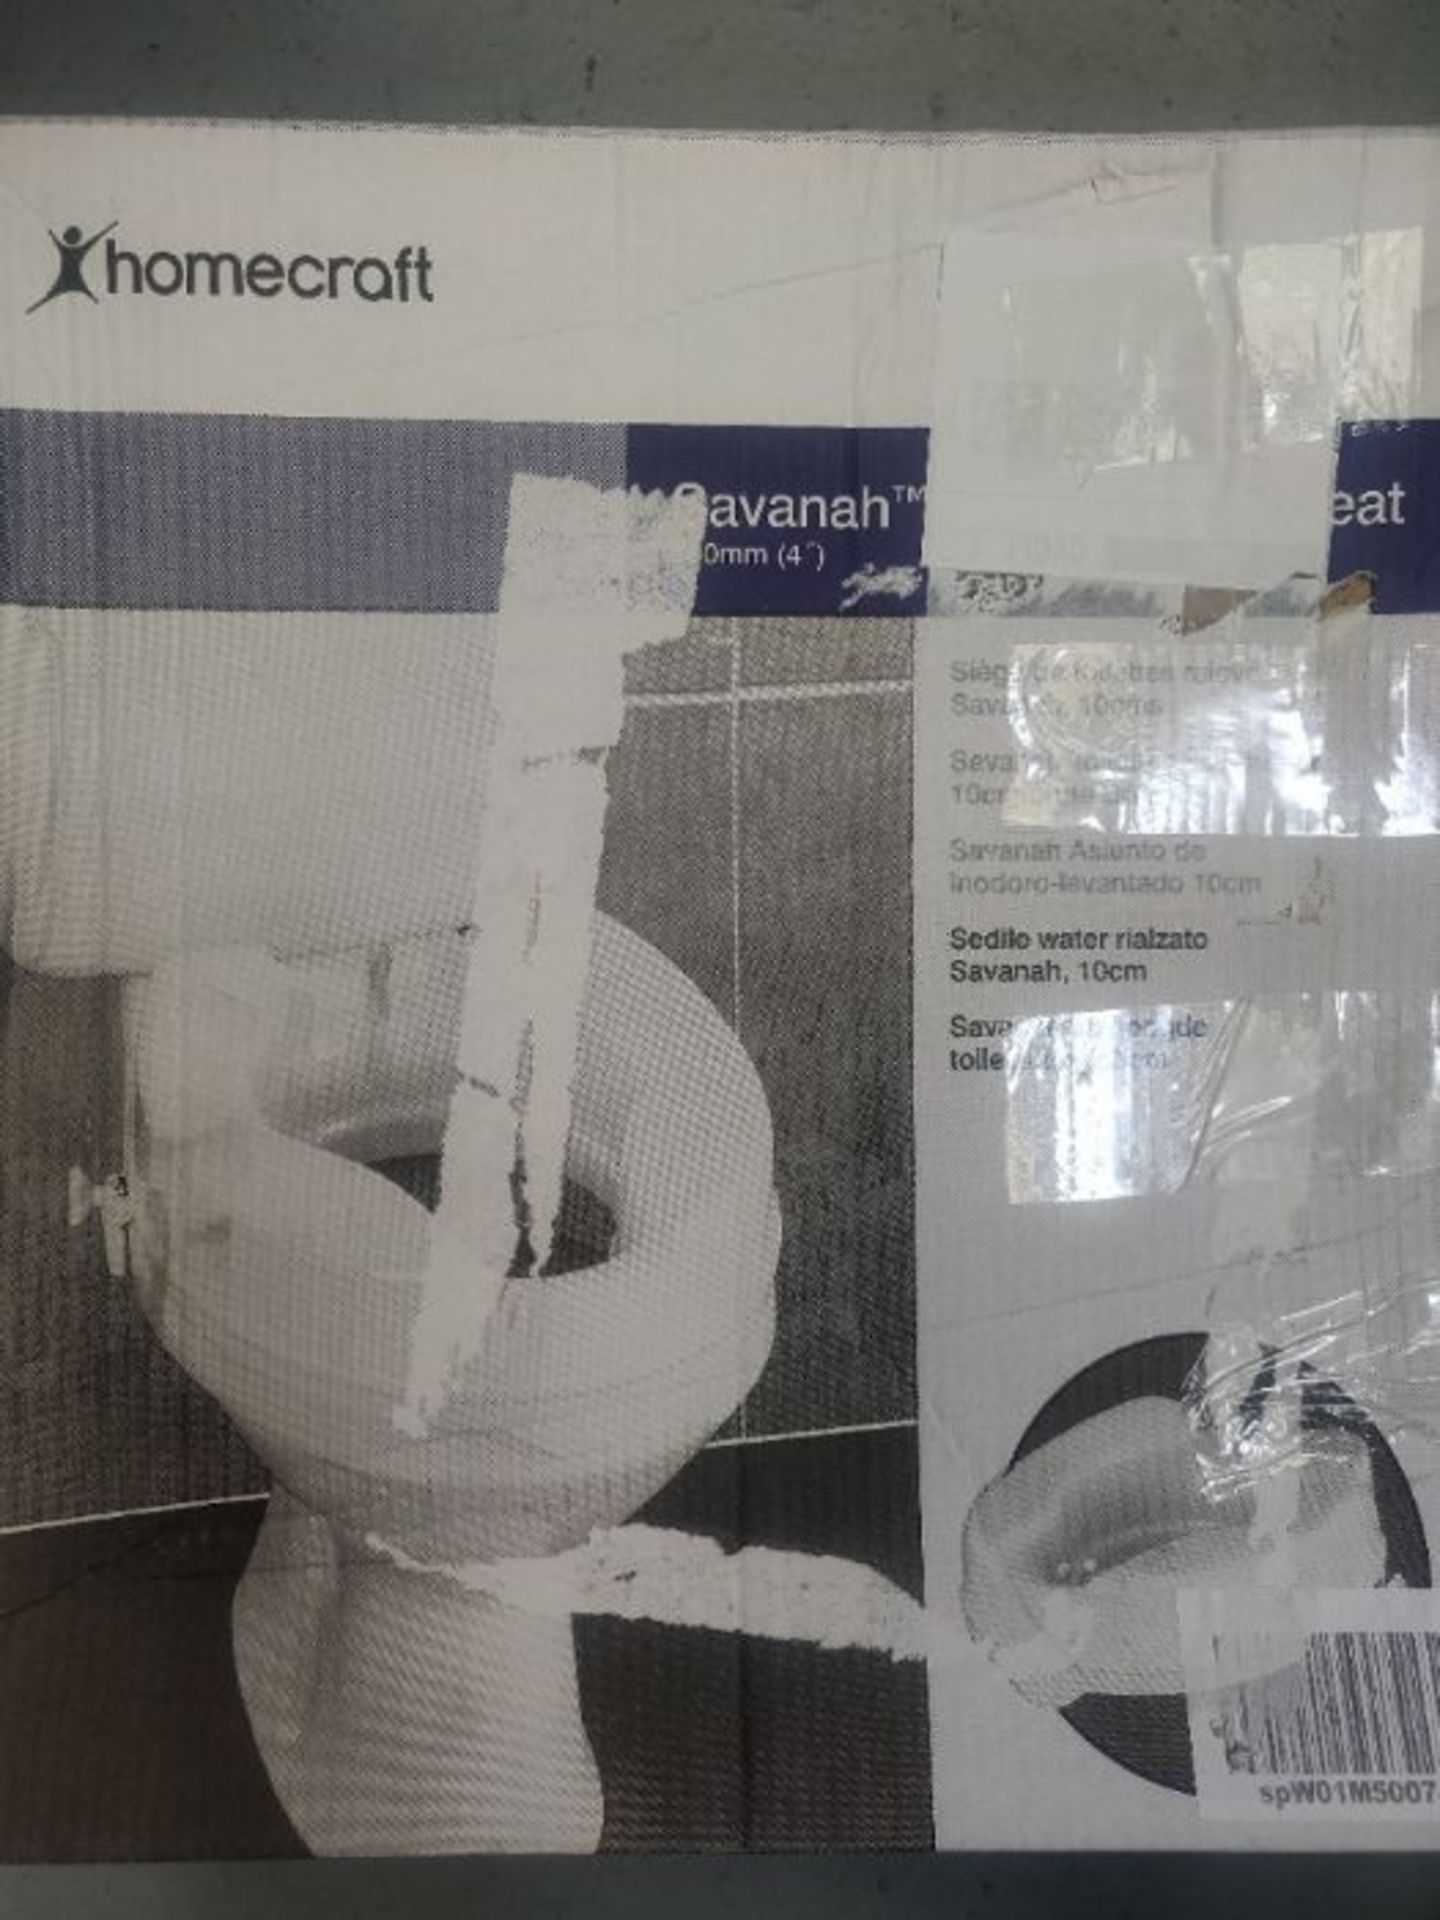 Homecraft Savanah Raised Toilet Seat without Lid, Elongated & Elevated Lock Seat Suppo - Image 2 of 3